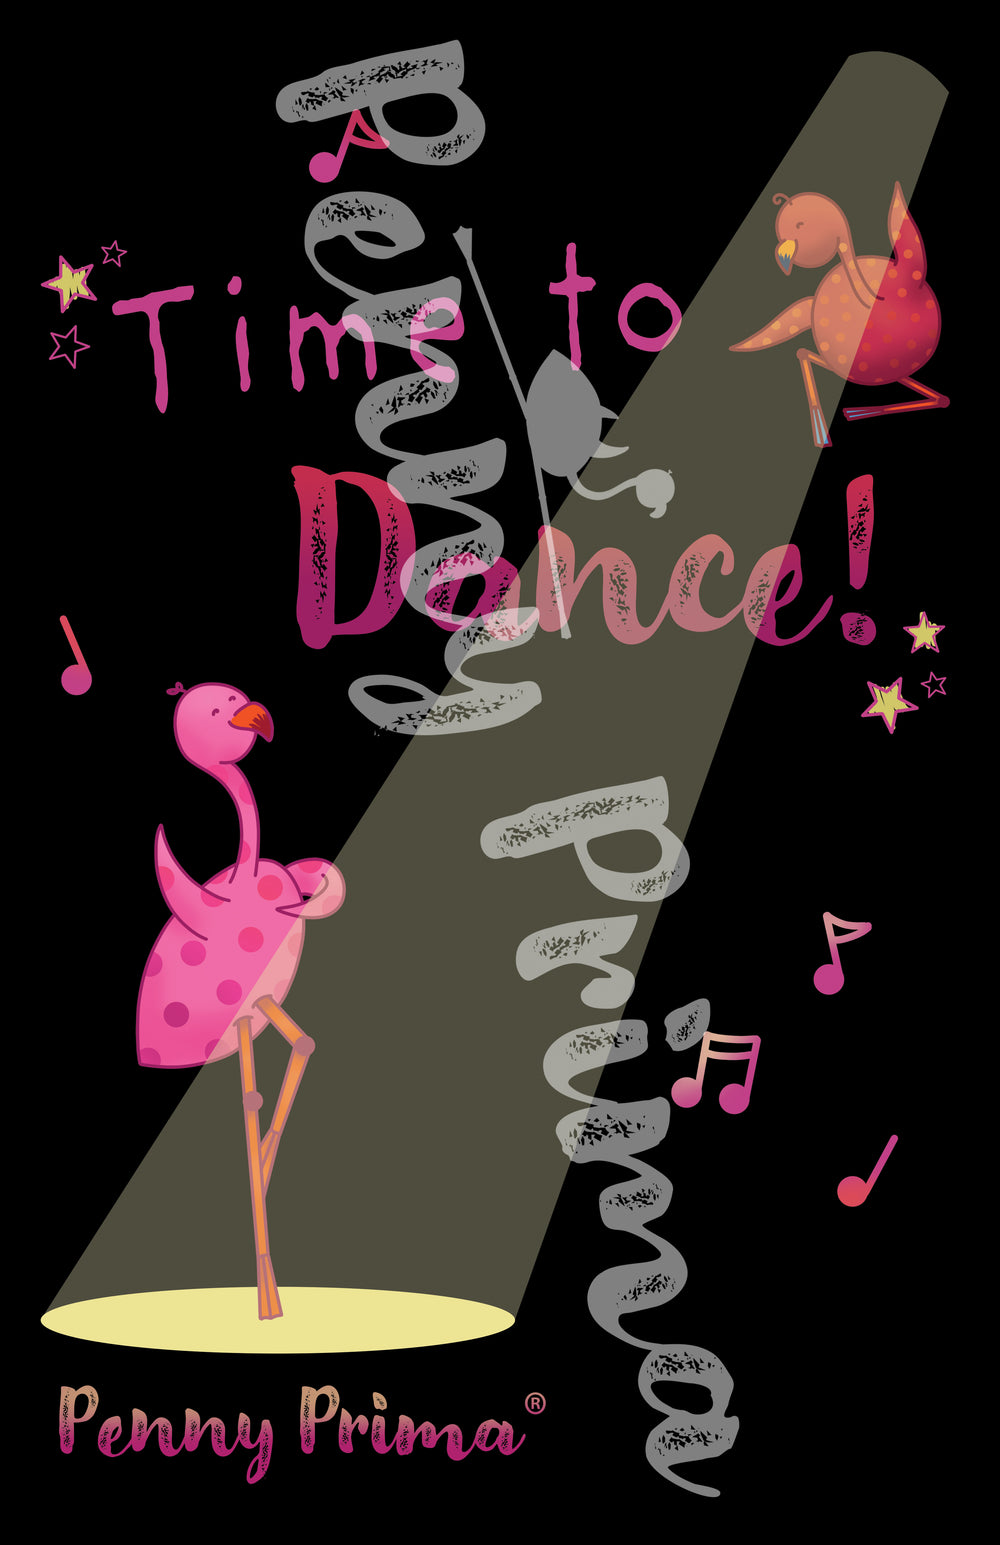 Time to Dance Classroom Poster